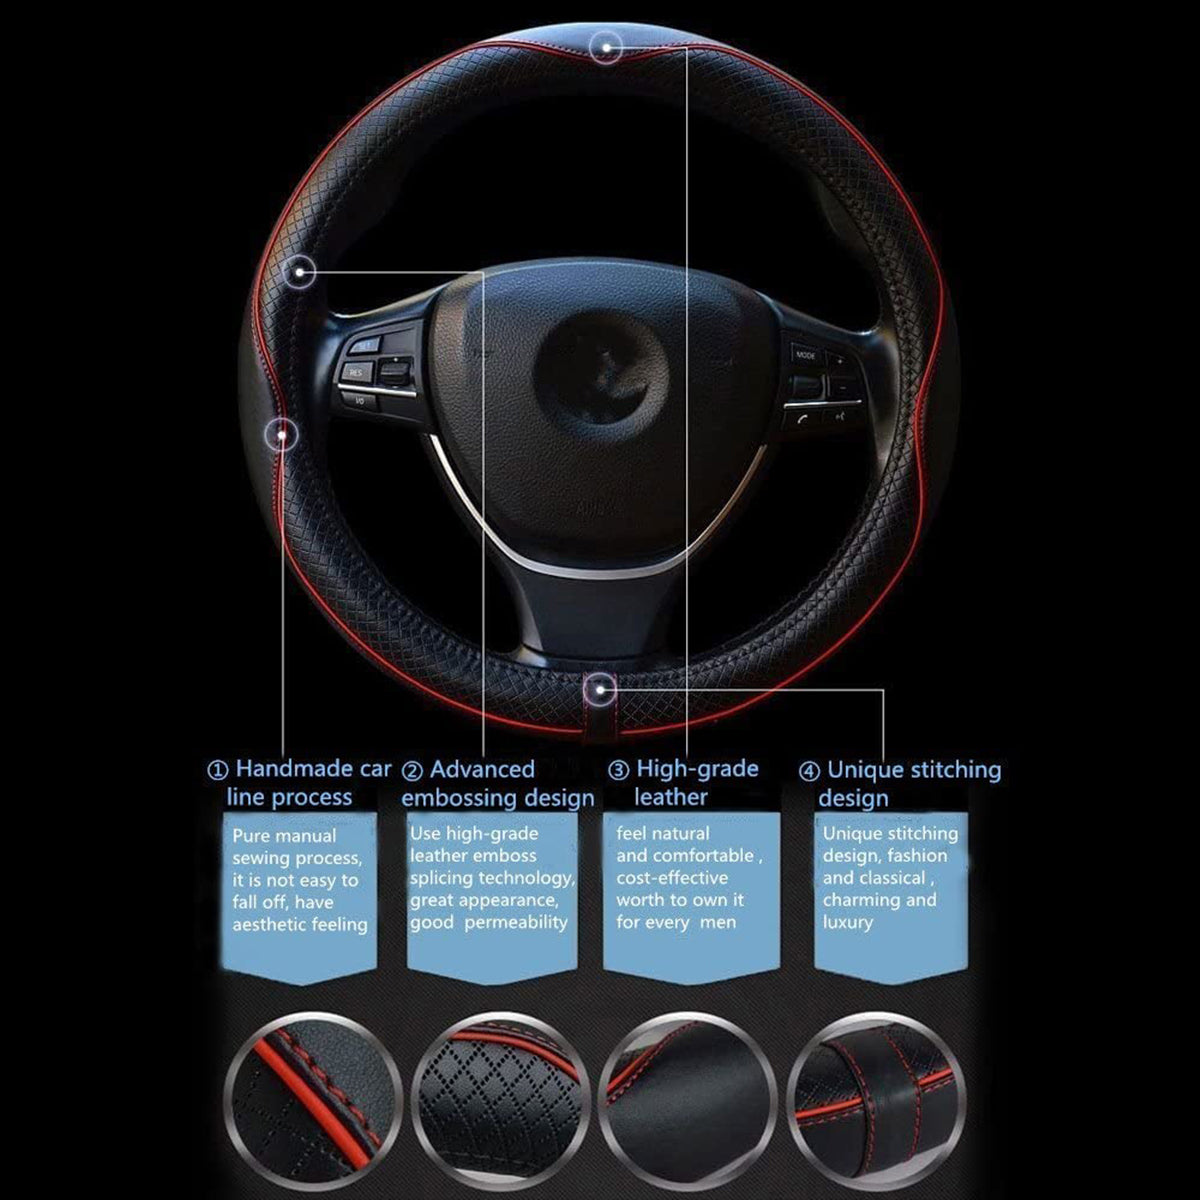 Car Steering Wheel Cover, Custom For Your Cars, Anti-Slip, Safety, Soft, Breathable, Heavy Duty, Thick, Full Surround, Sports Style, Car Accessories JG18990 - Delicate Leather